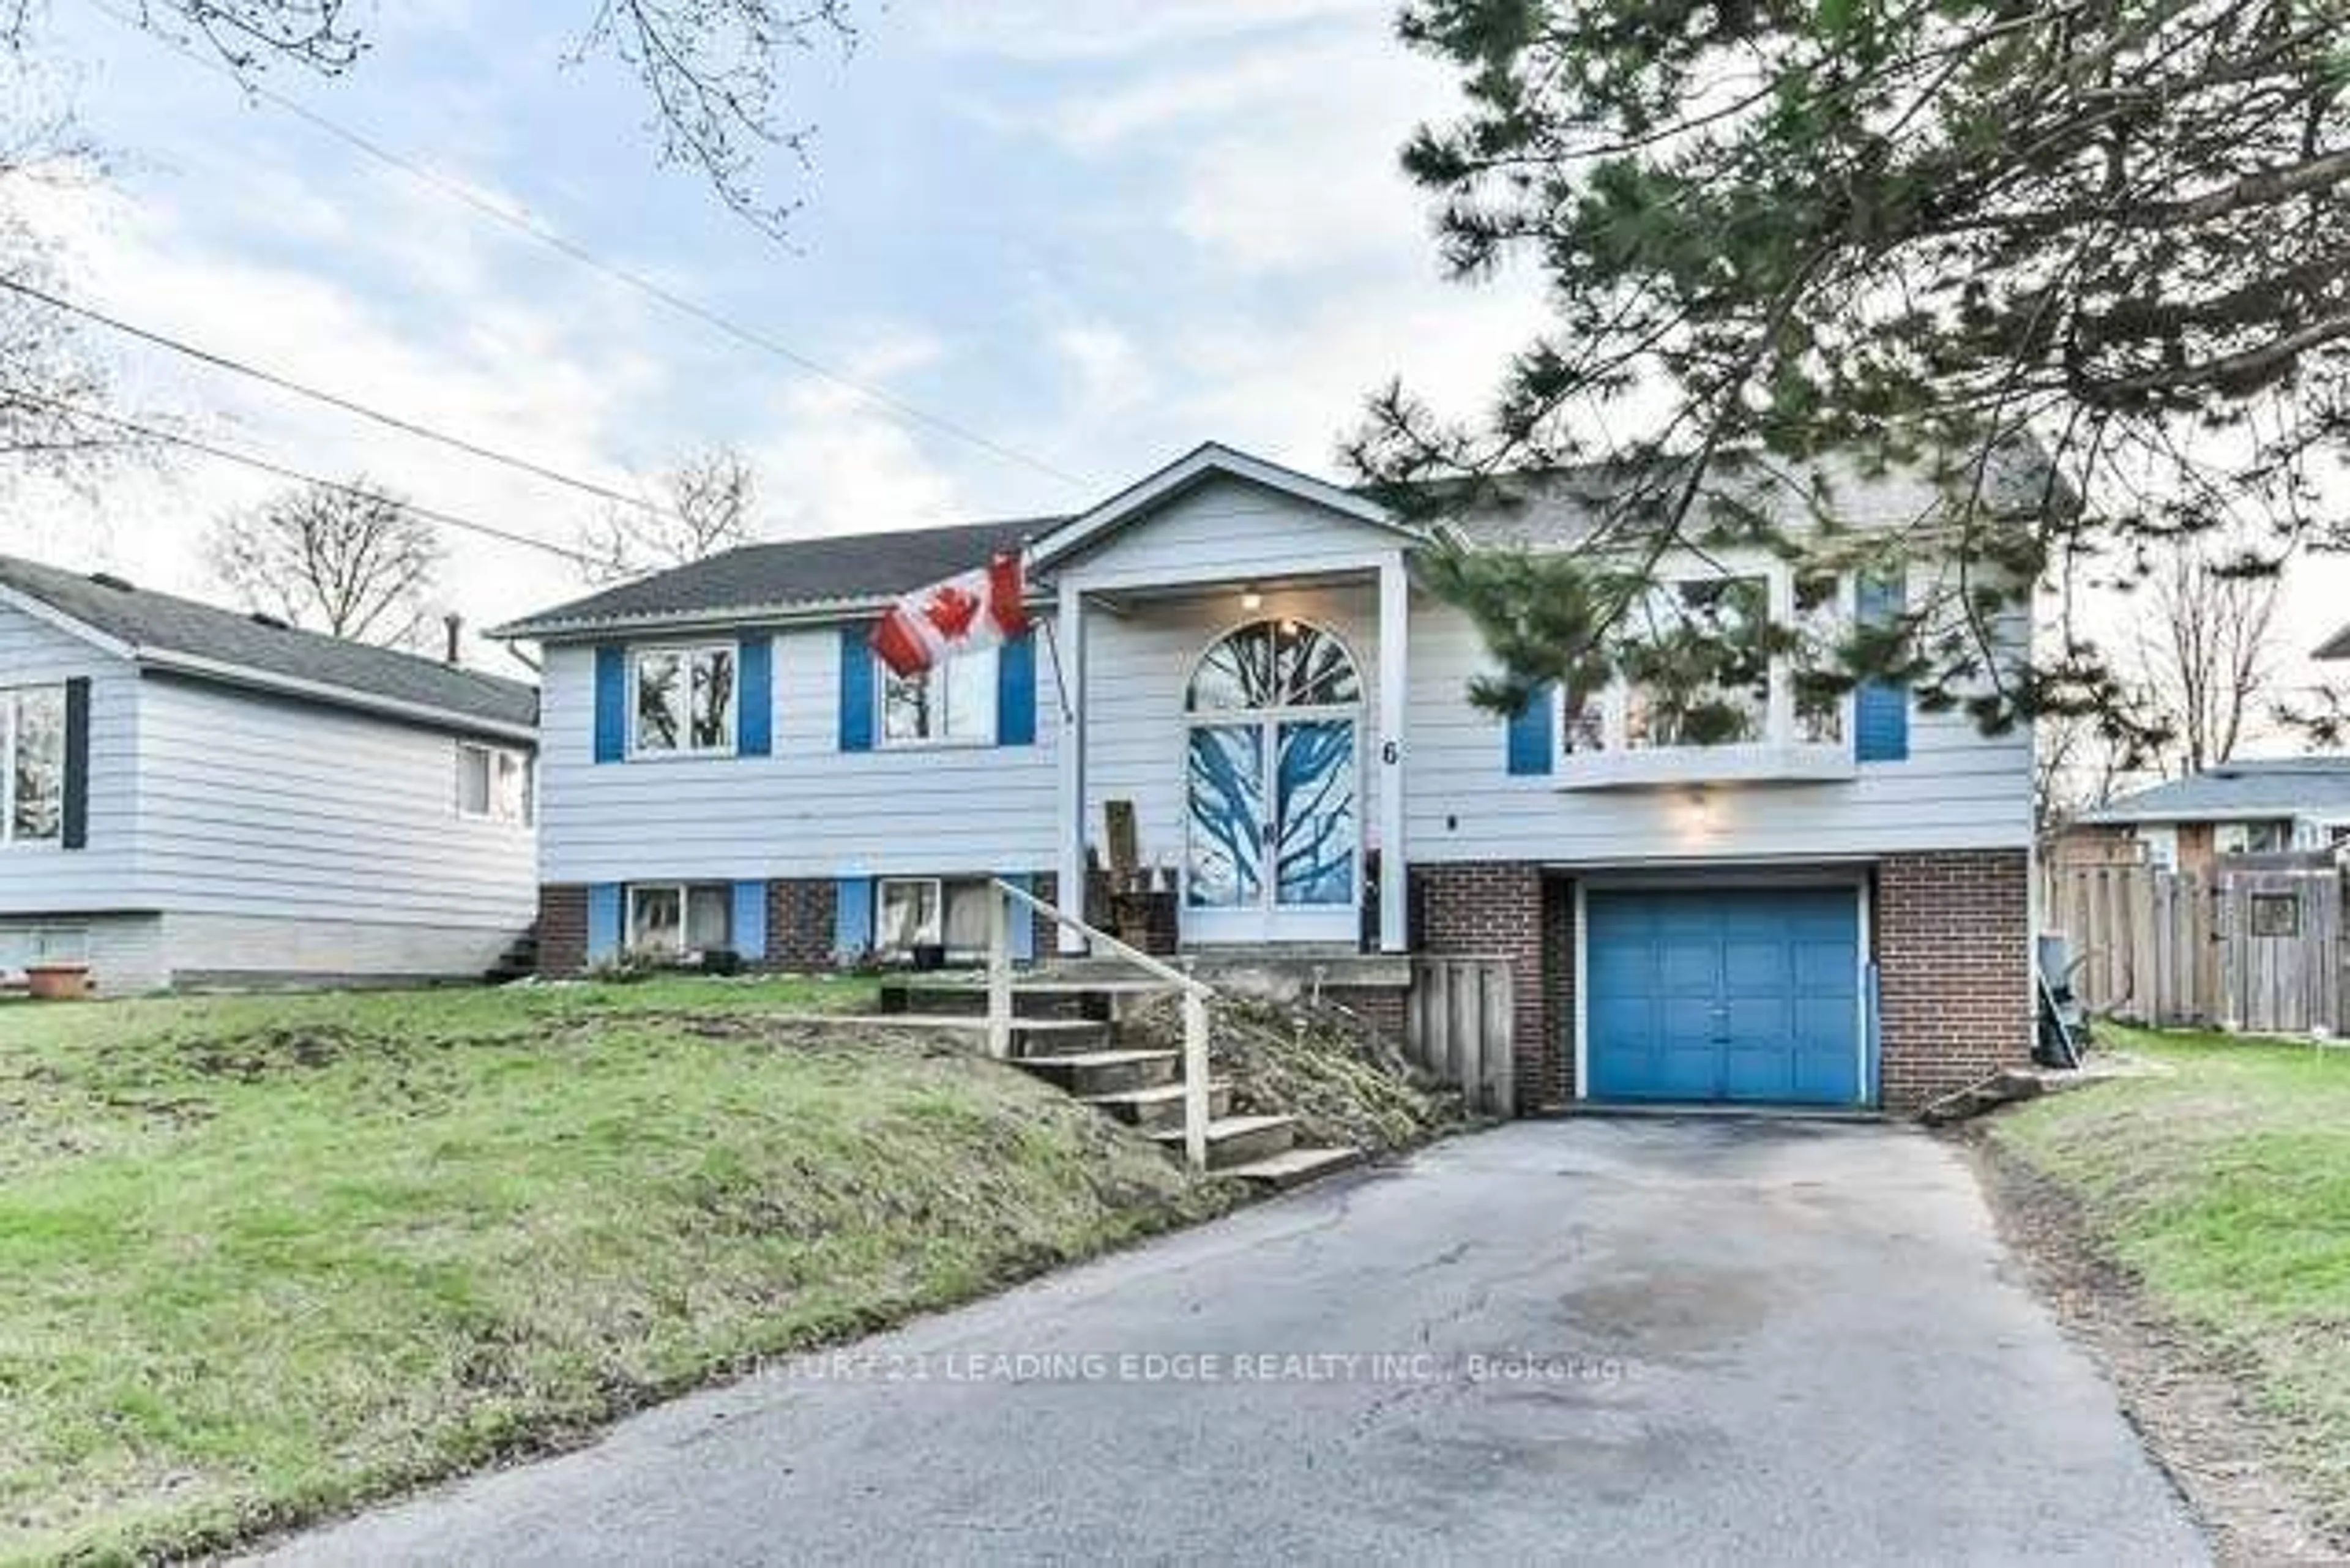 Frontside or backside of a home for 6 Bakerdale Rd, Markham Ontario L3P 1J4